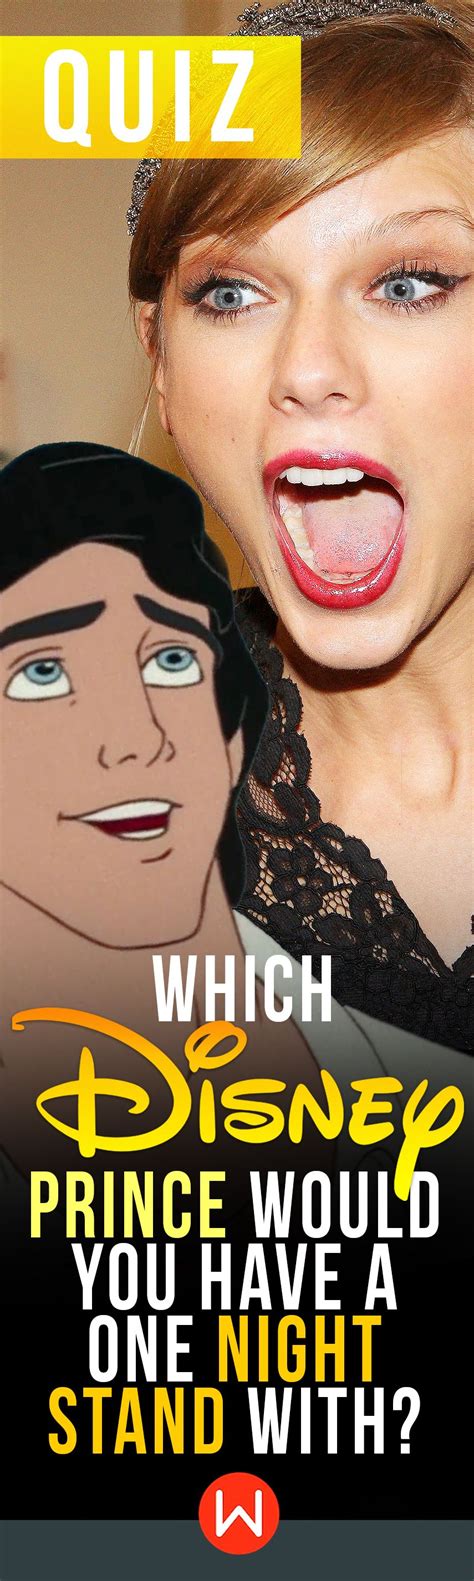 quiz which disney prince would you have a one night stand with